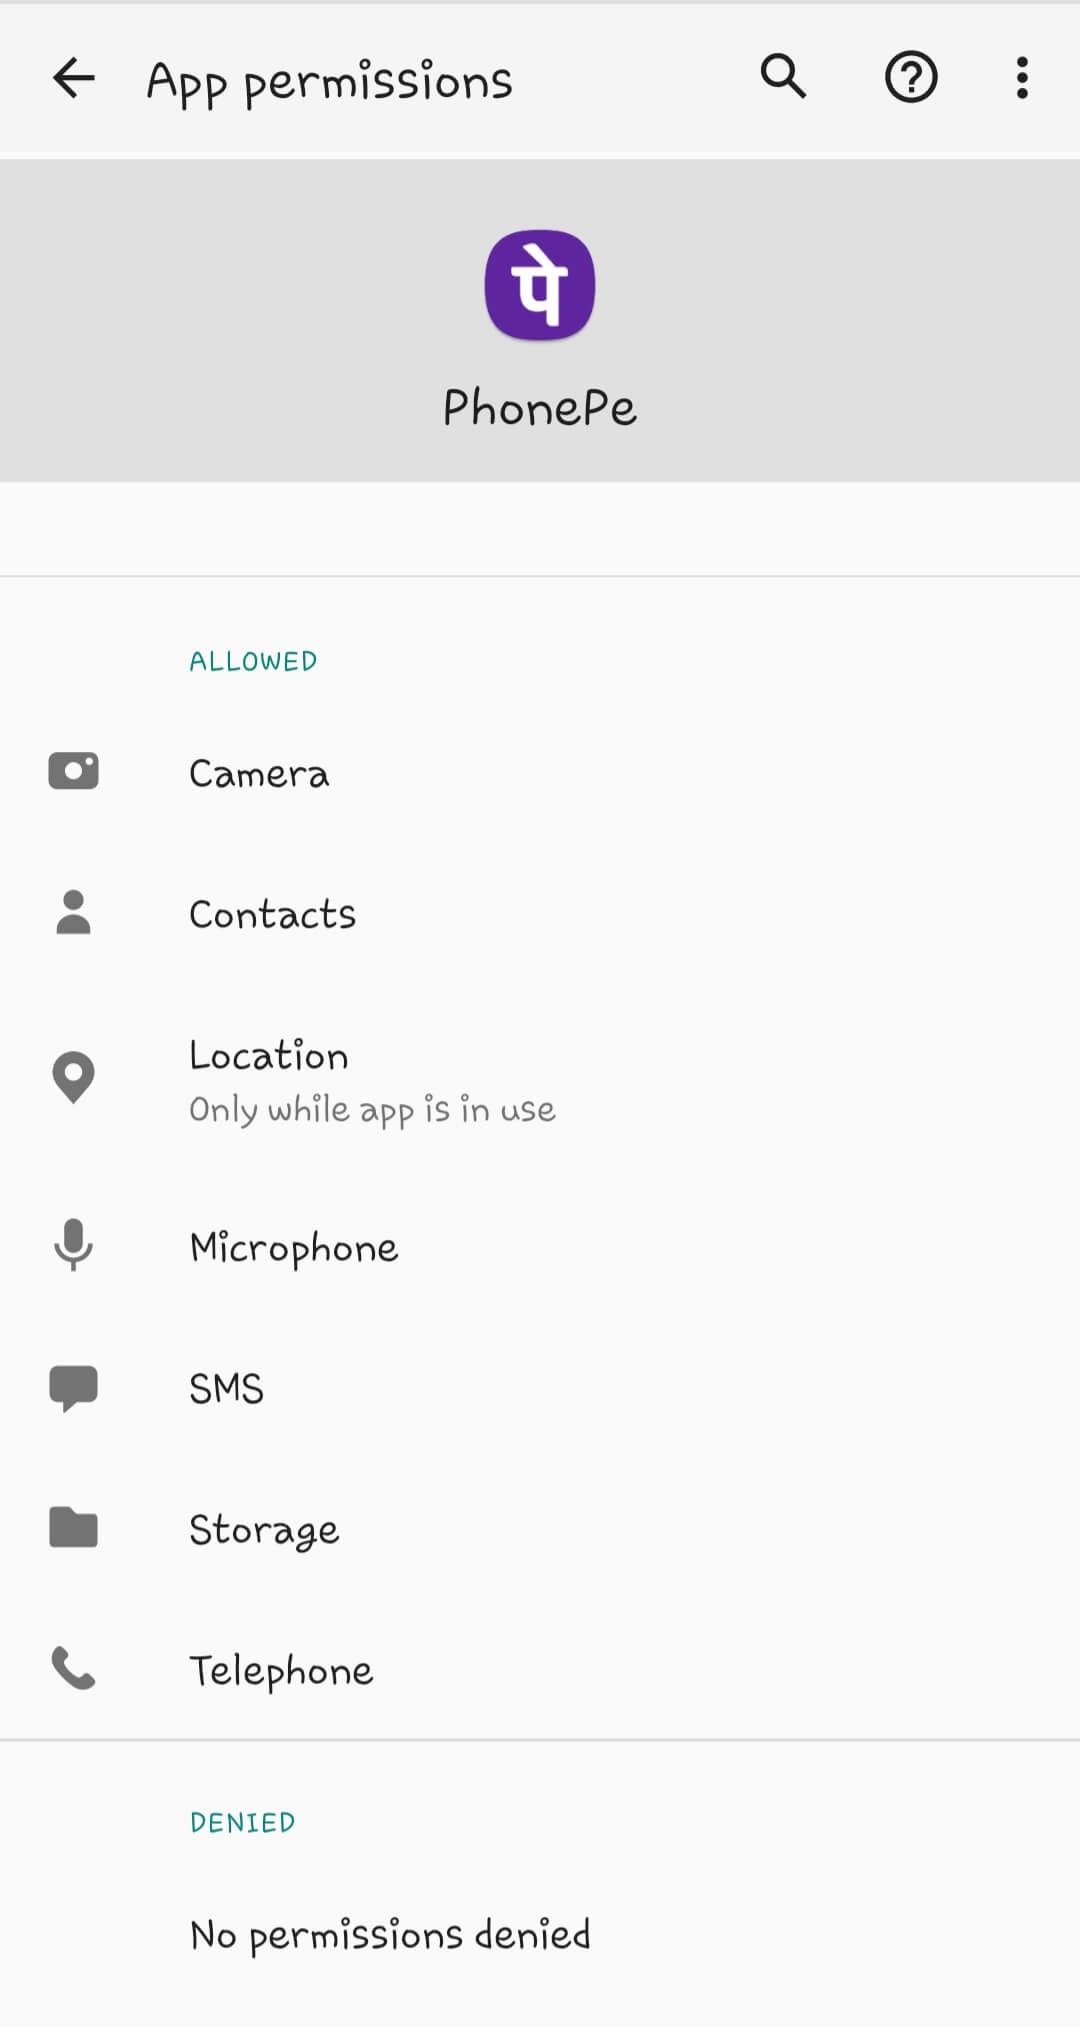 Enable all app permissions for PhonePe